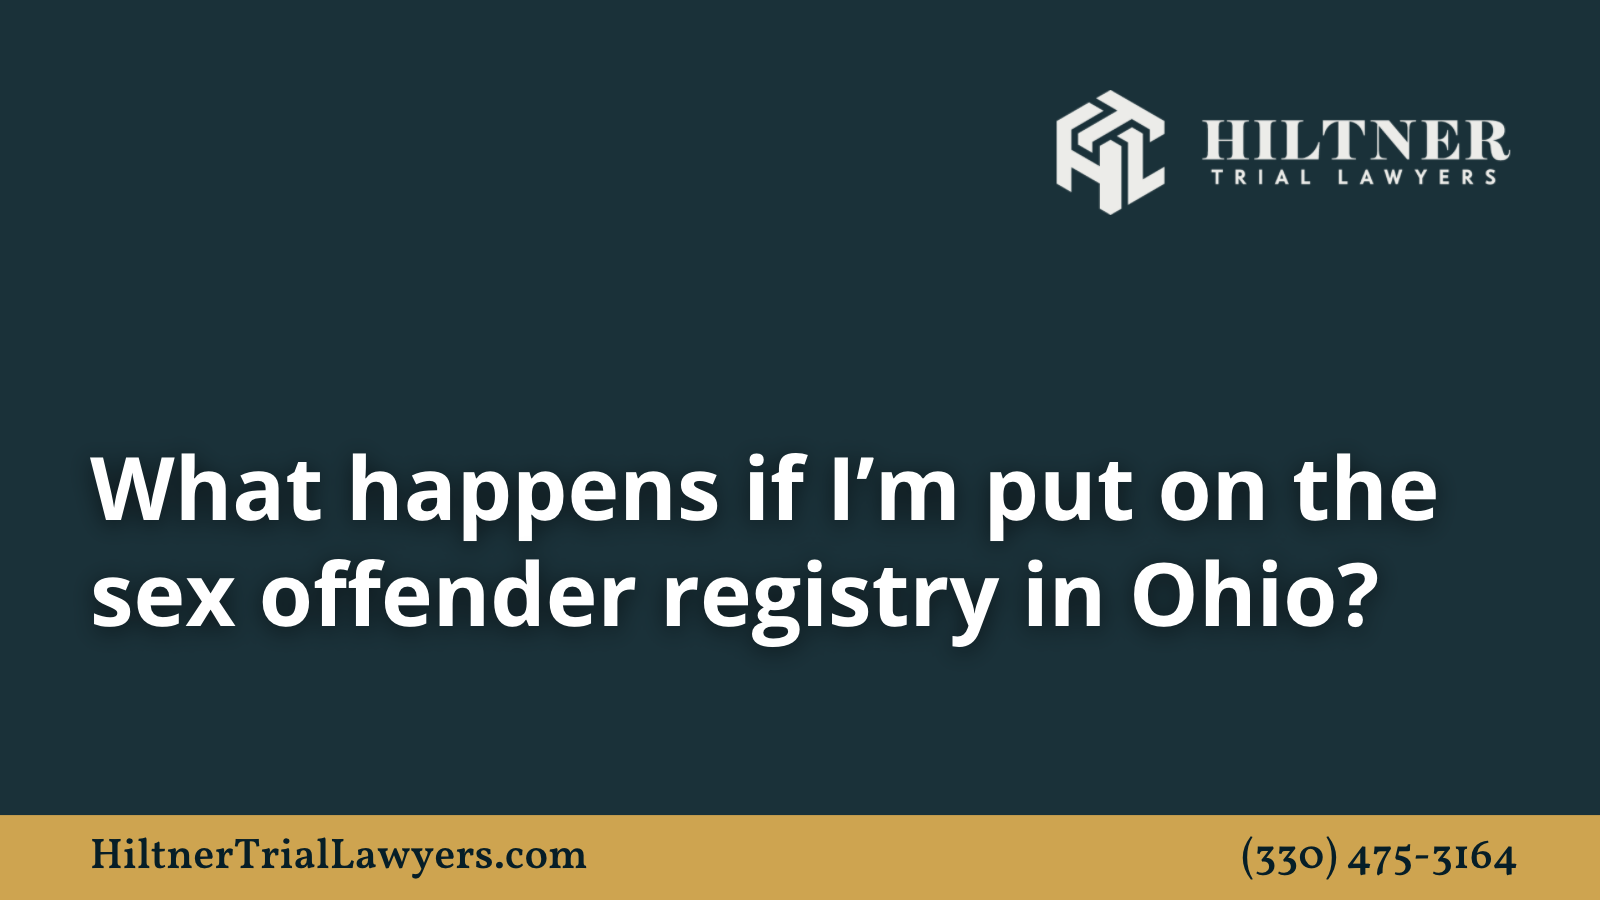 What happens if I’m put on the sex offender registry in Ohio - Hiltner Trial Lawyers Ohio - max hiltner